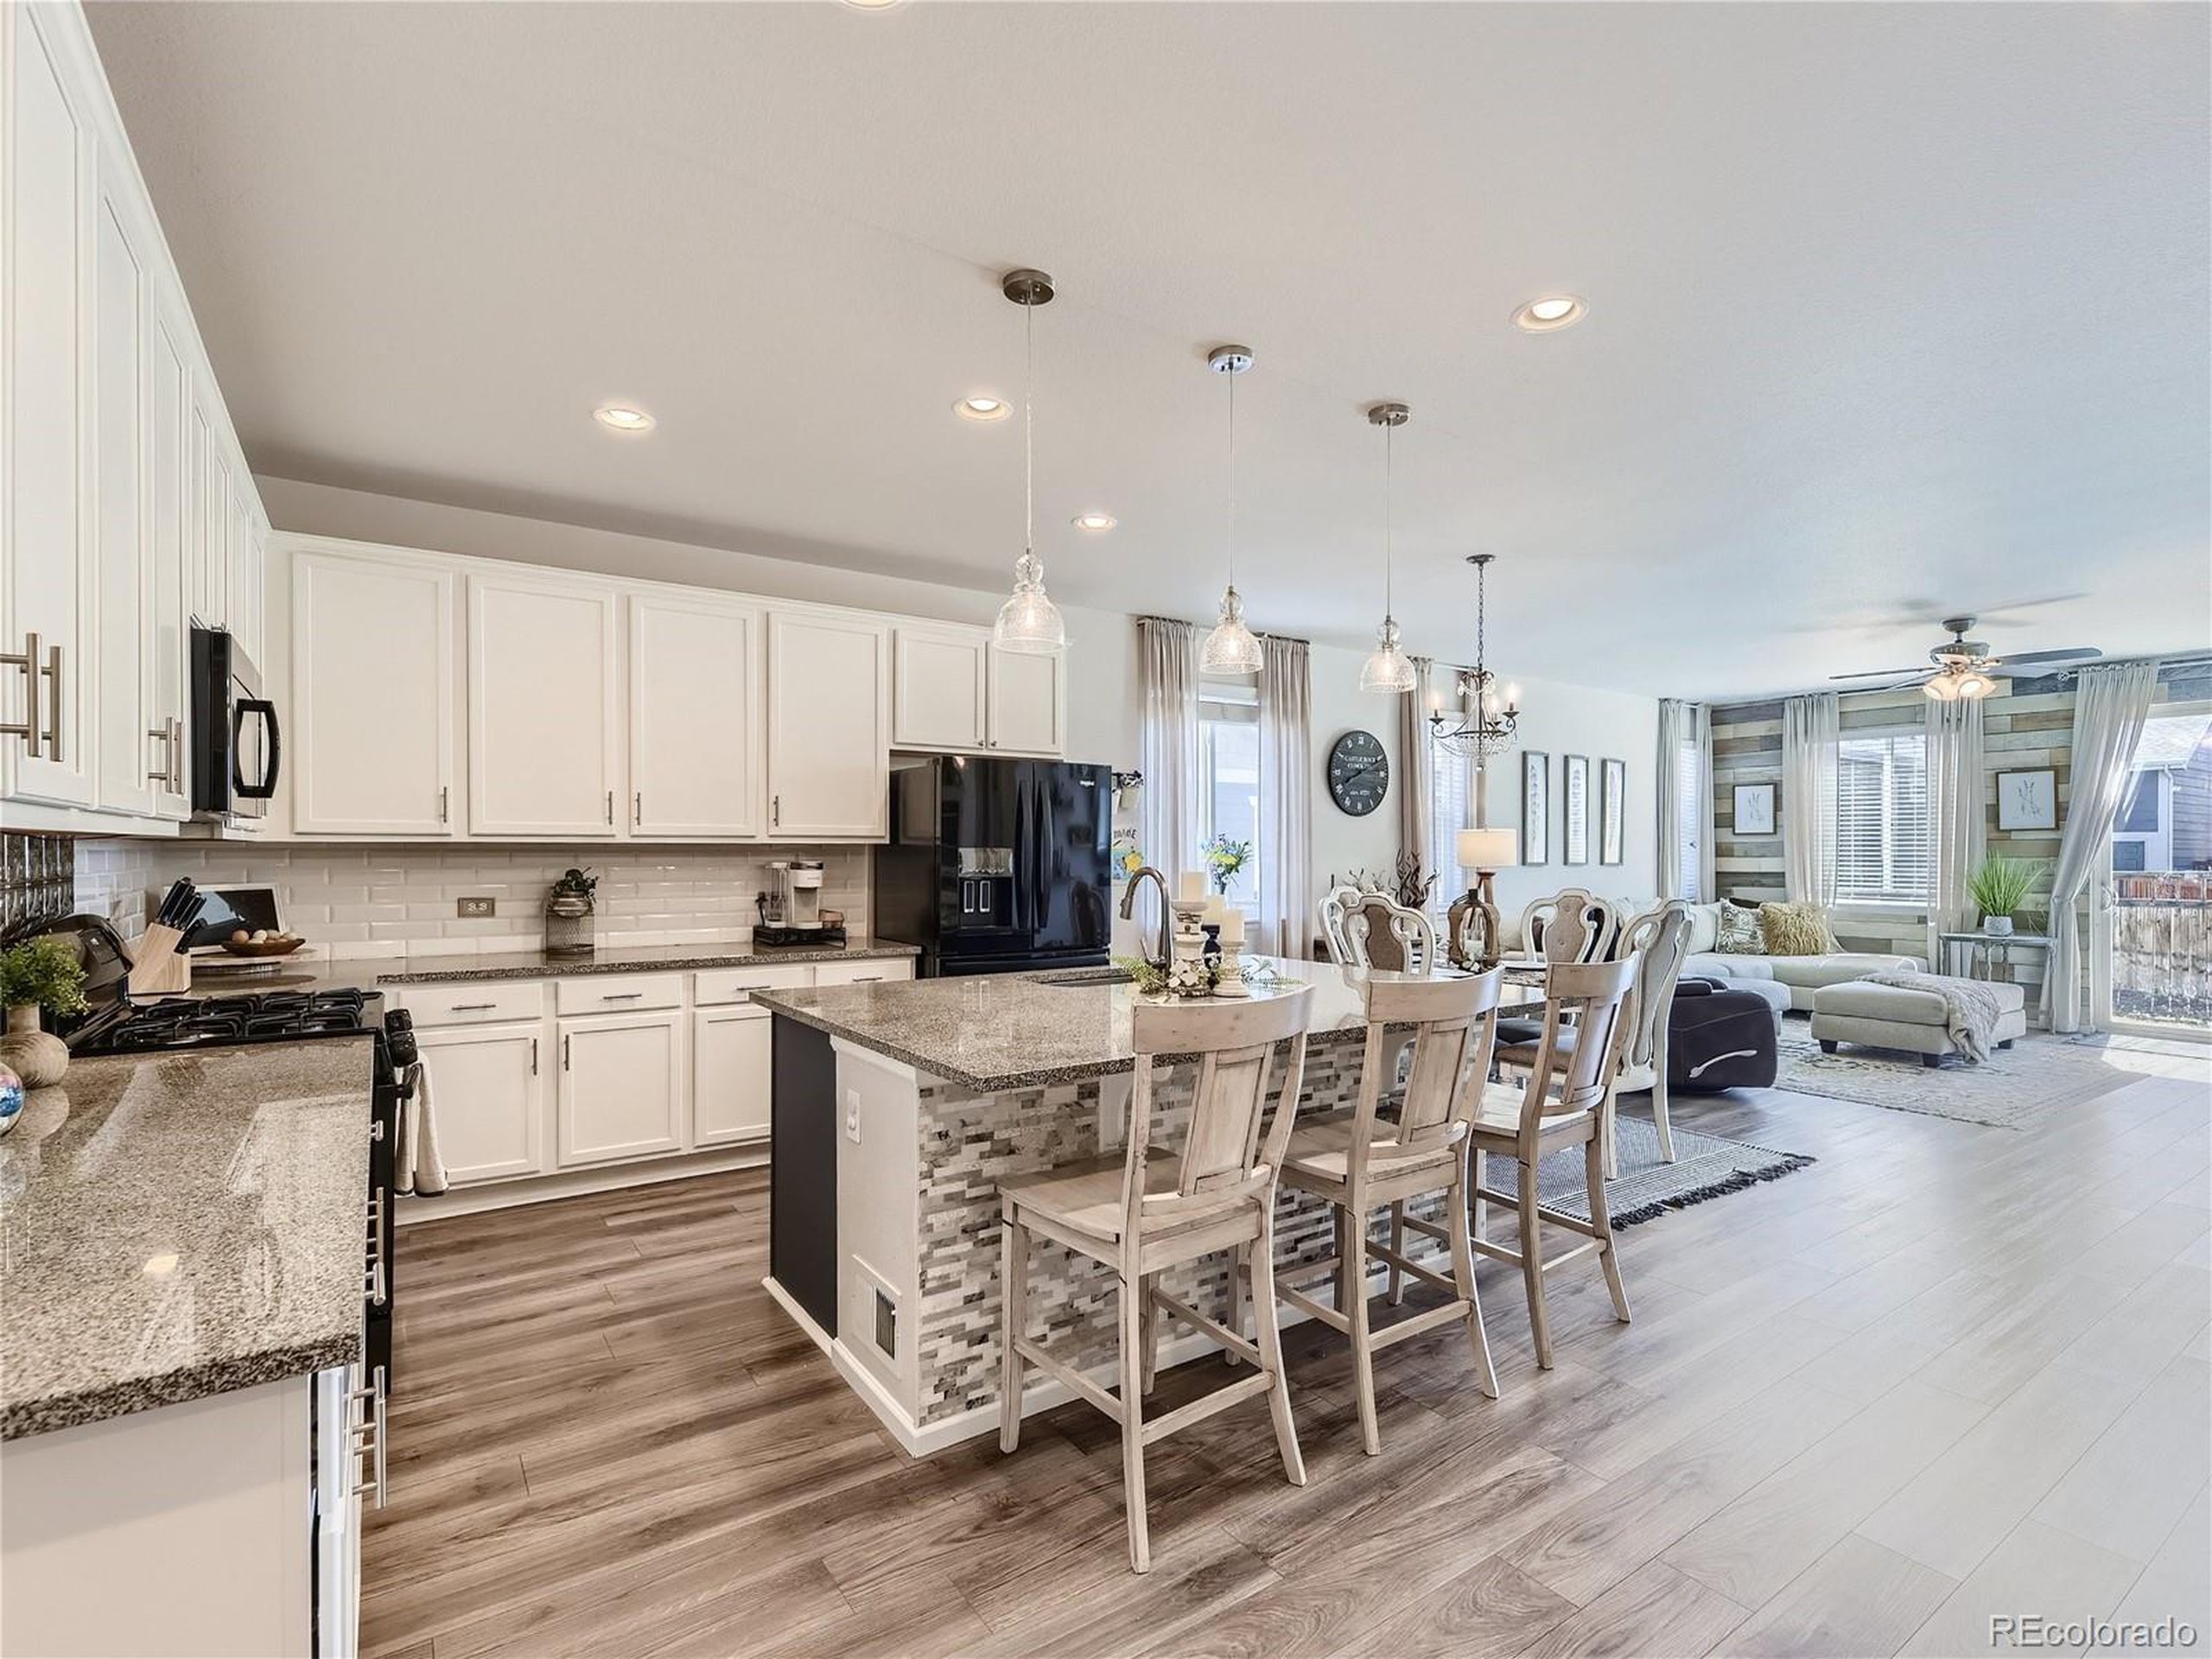 a view of a kitchen with kitchen island a dining table chairs stainless steel appliances and cabinets